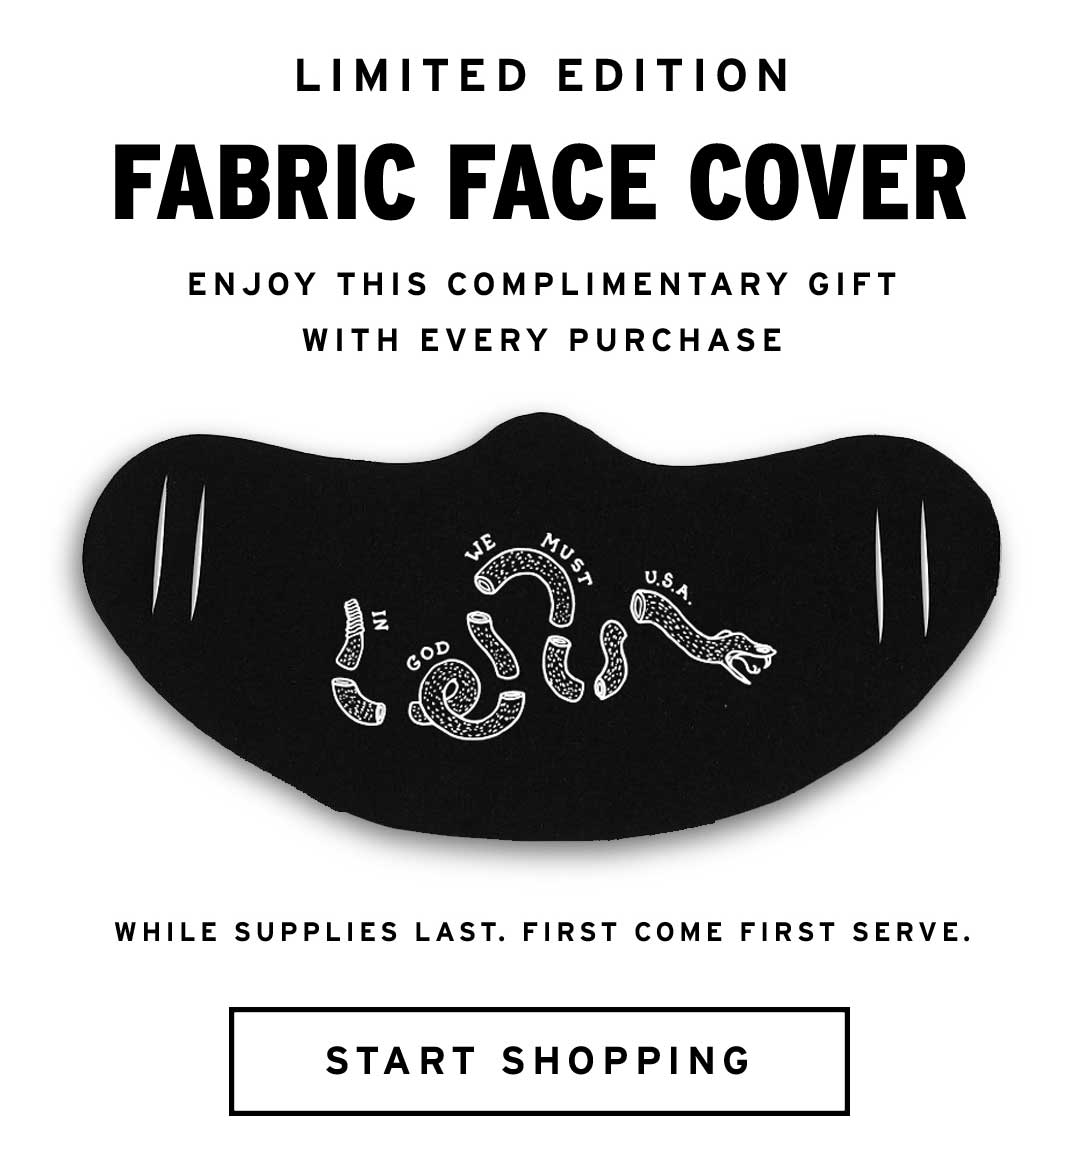 Limited edition fabric facemask with any purchase. while supplies last. 